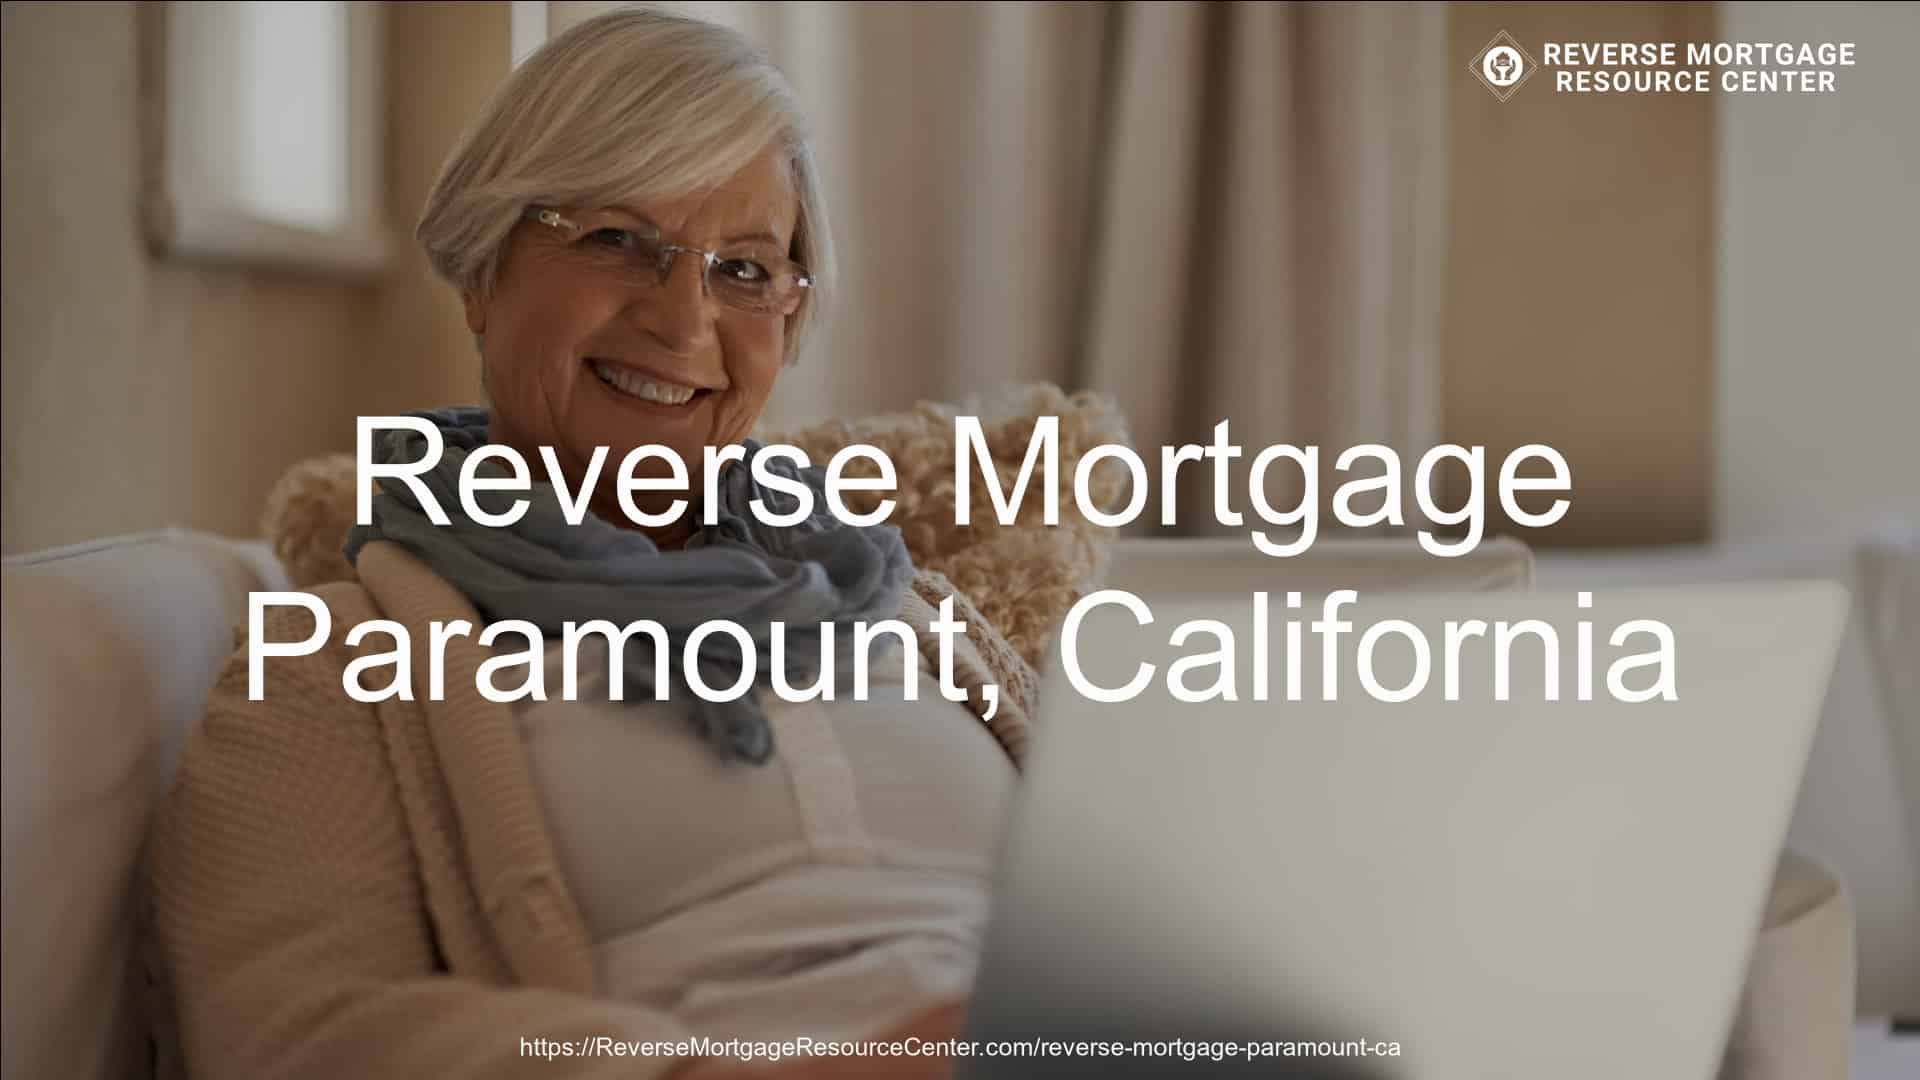 Reverse Mortgage Loans in Paramount California